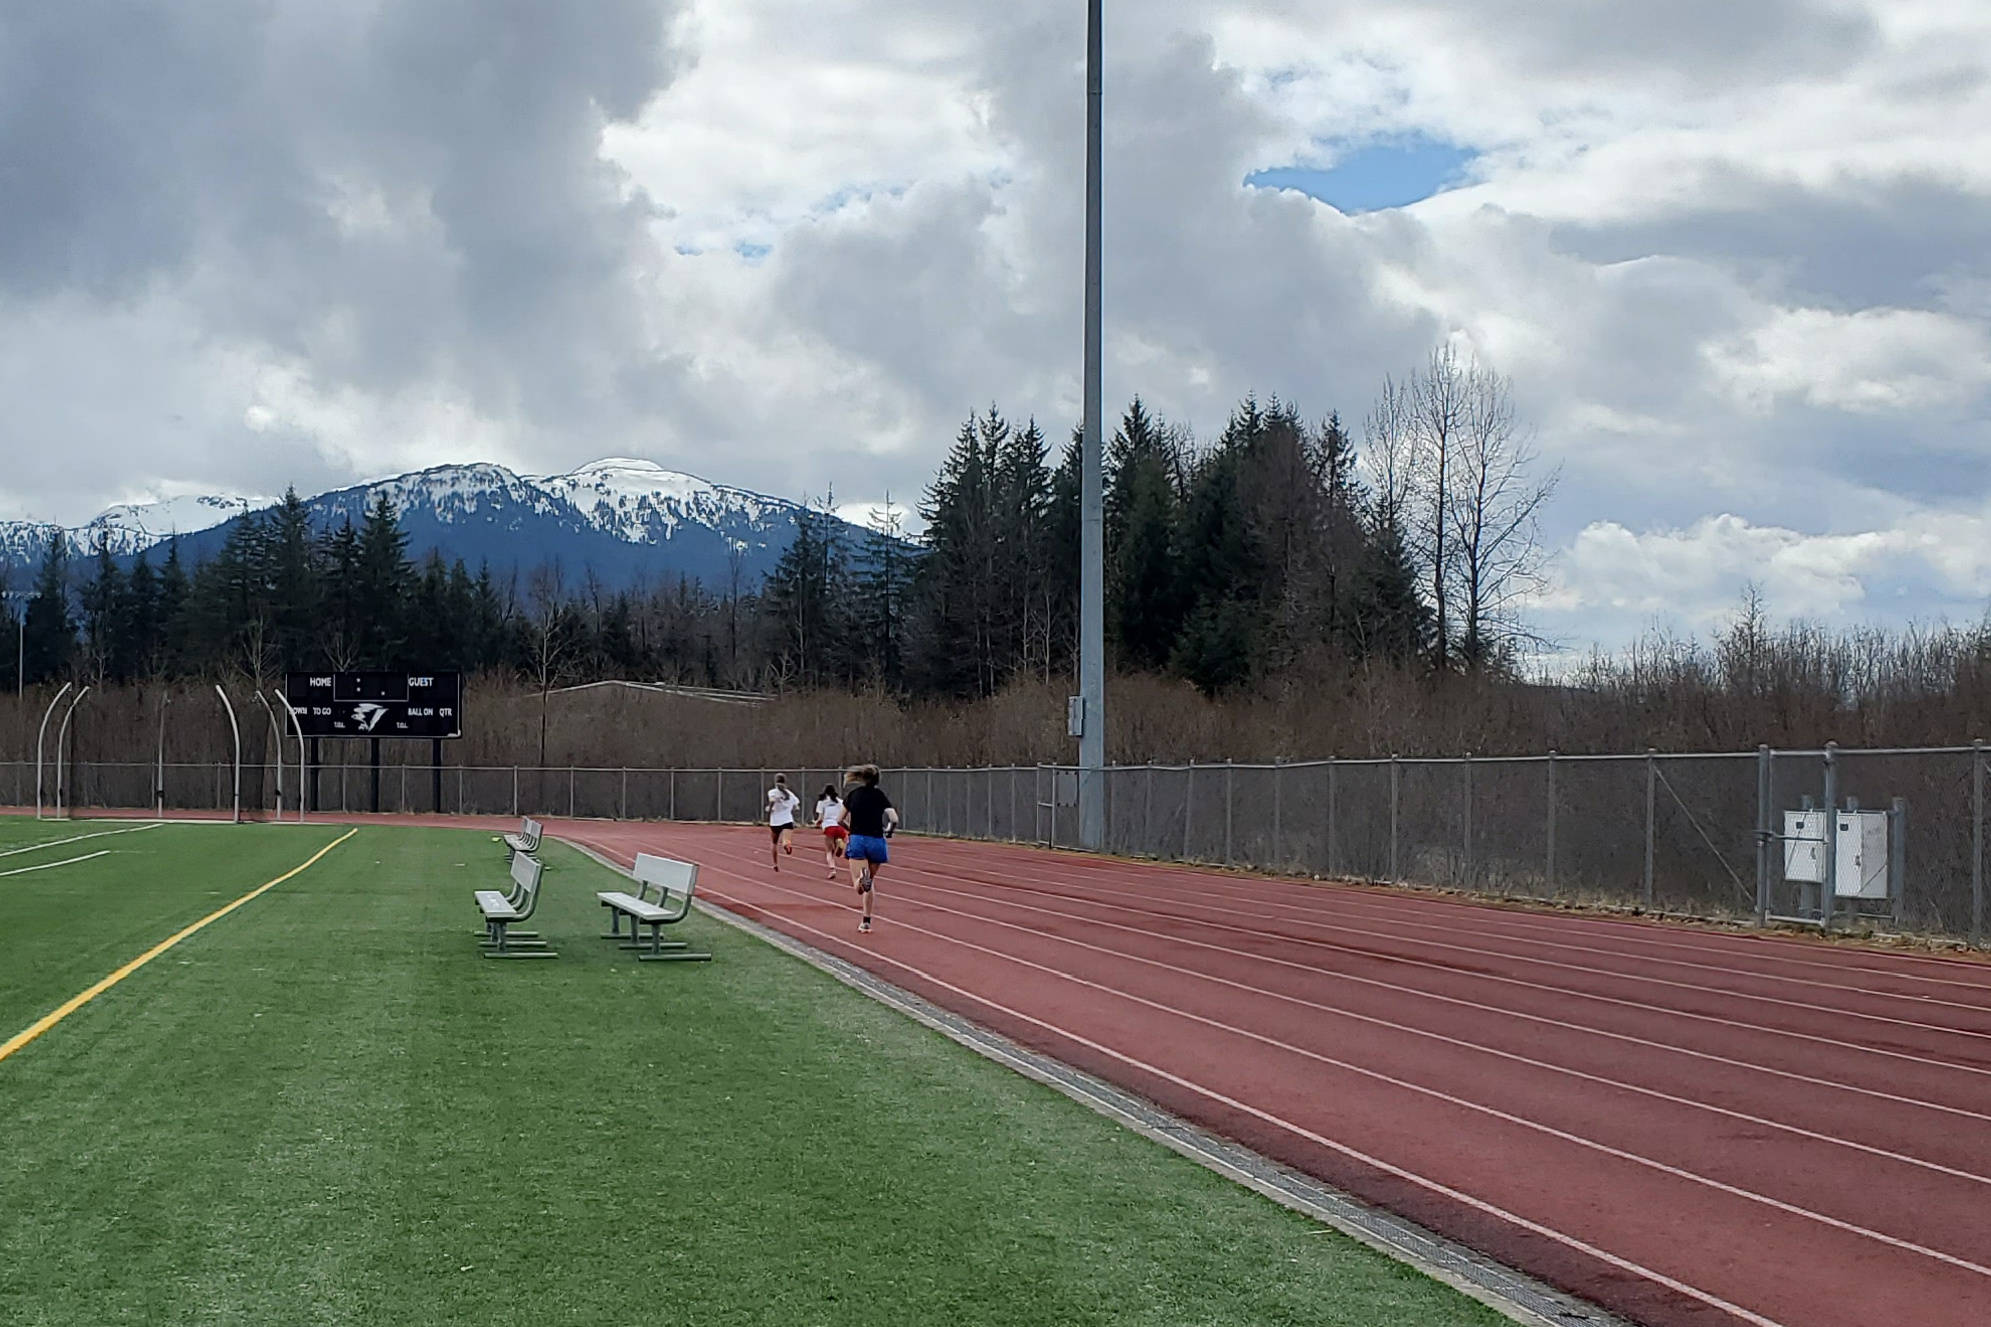 The Juneau-Douglas High School: Yadaa.at Kalé and Thunder Mountain High School track teams held a meet at TMHS on April 30, 2021 as the track season gets going. (Courtesy photo / Dwayne Duskin)